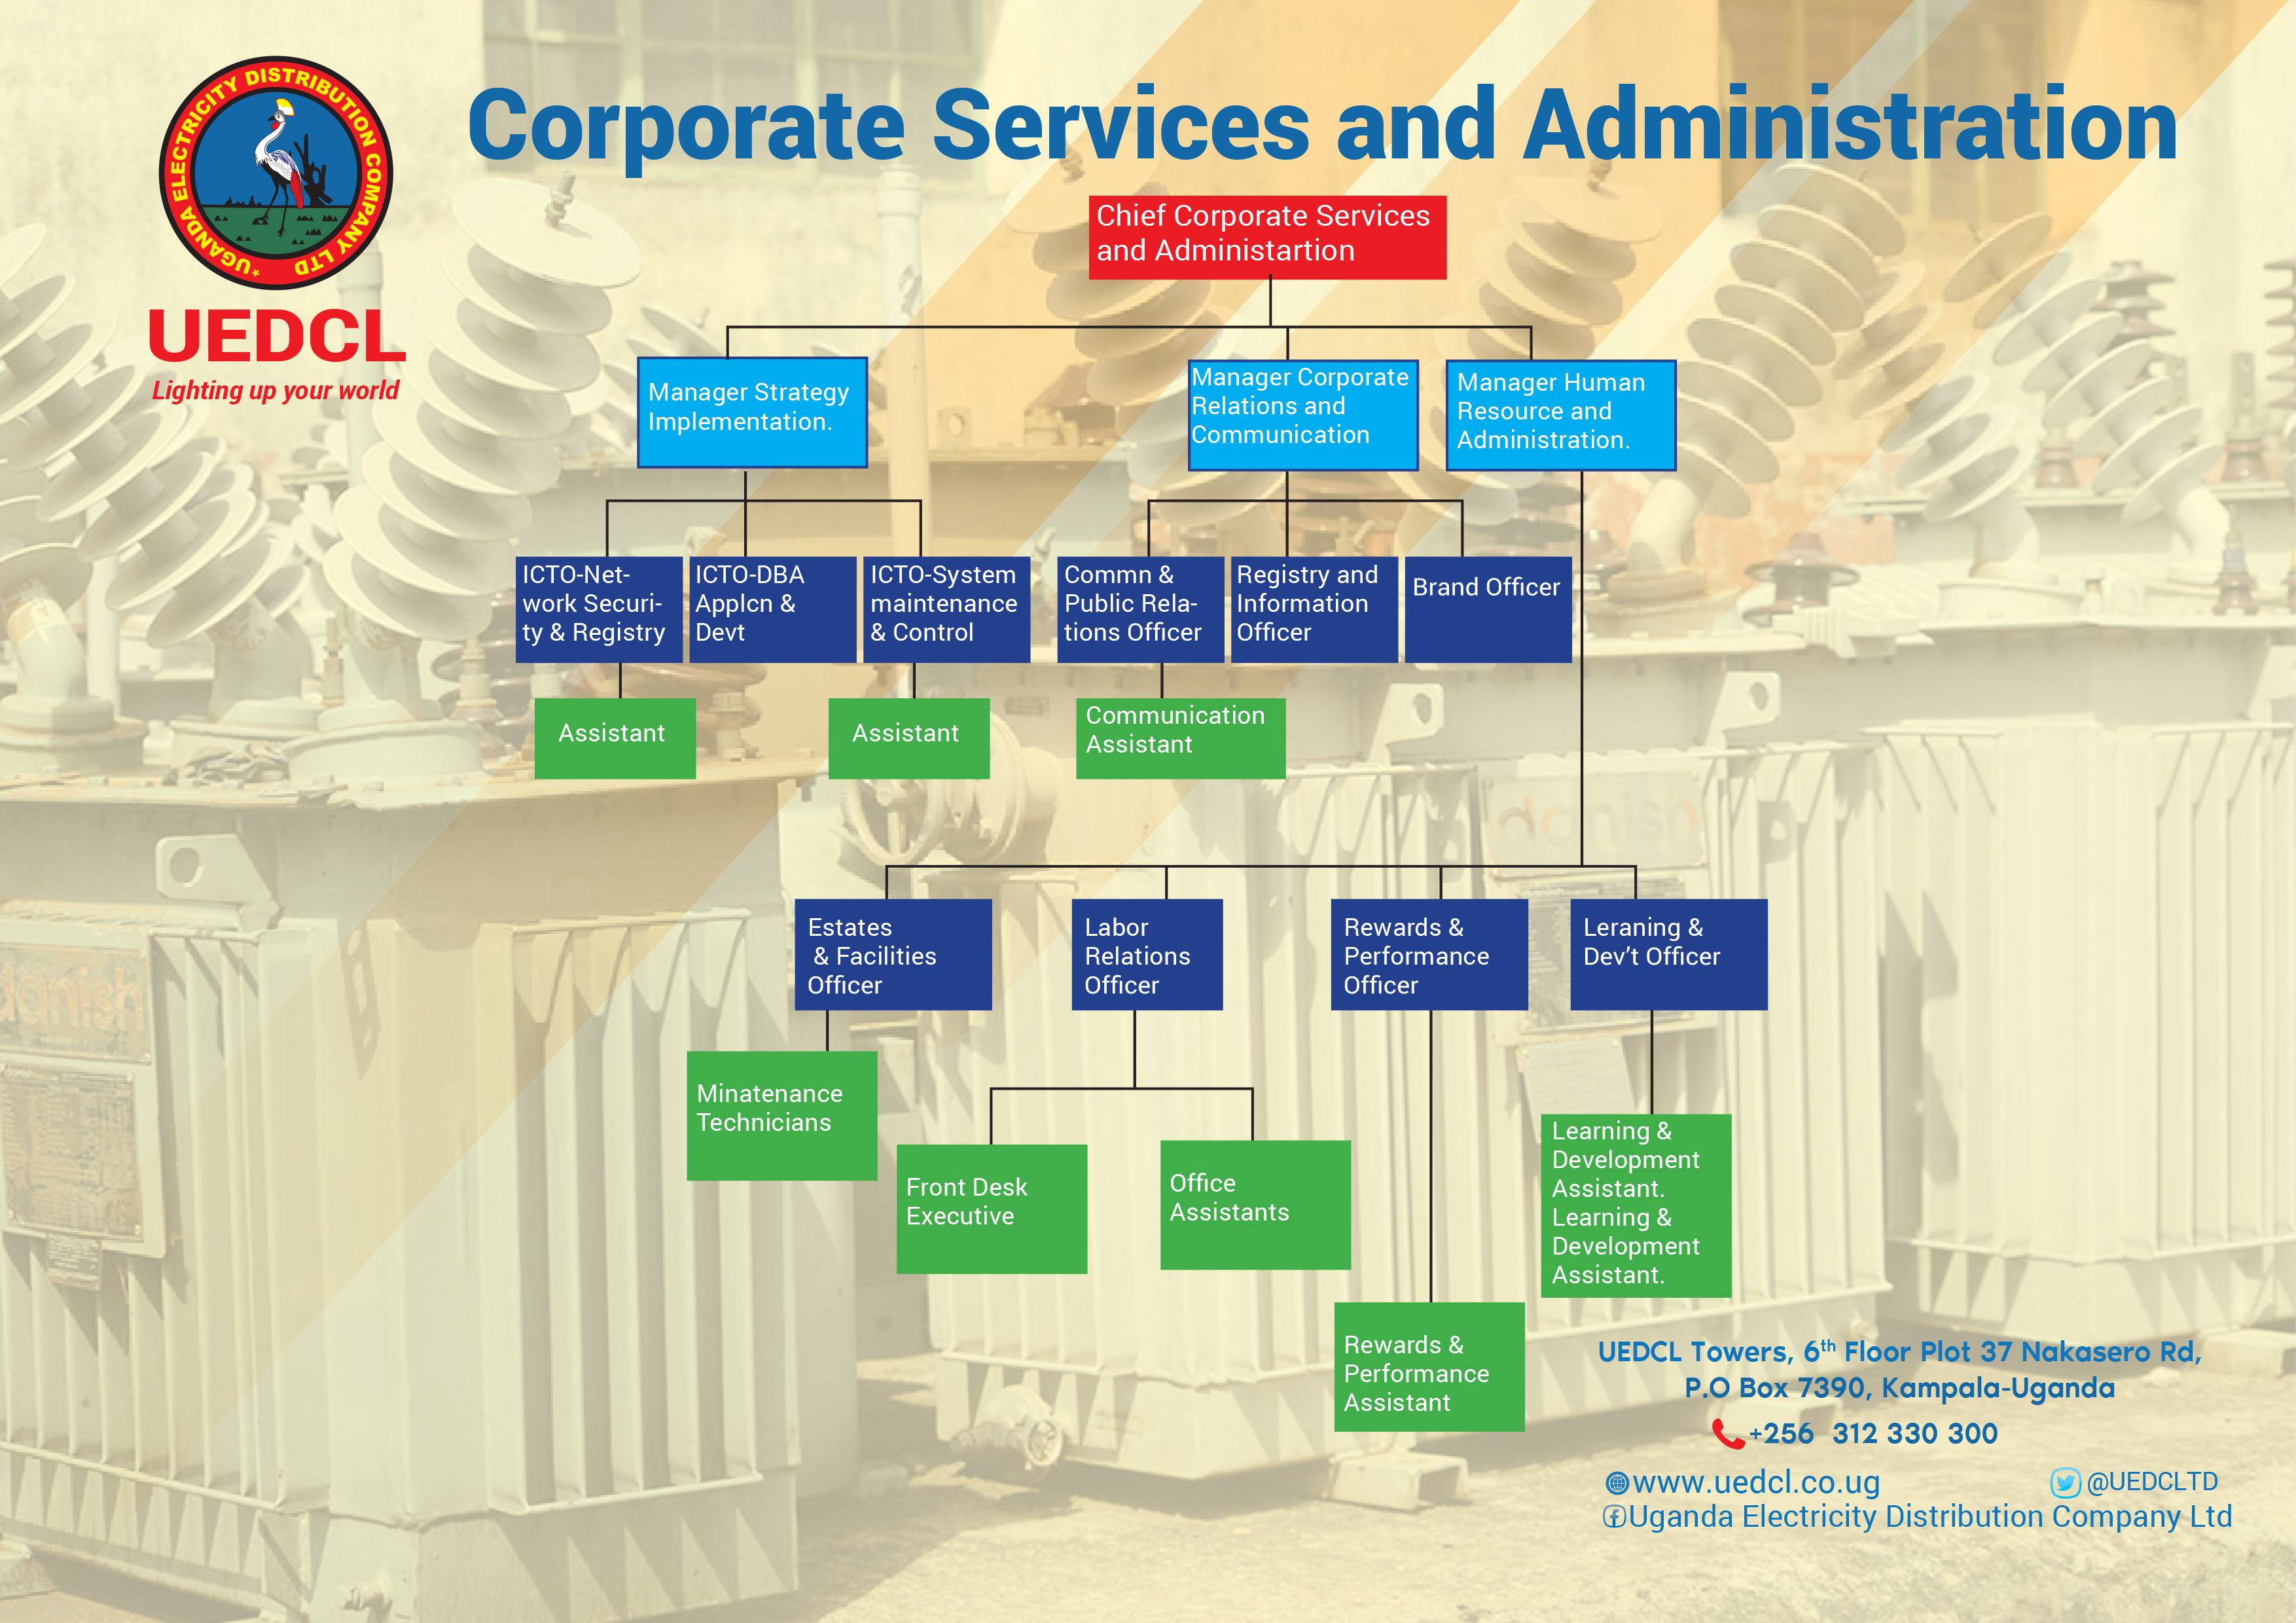 UEDCL Corporate Services and Administration structure